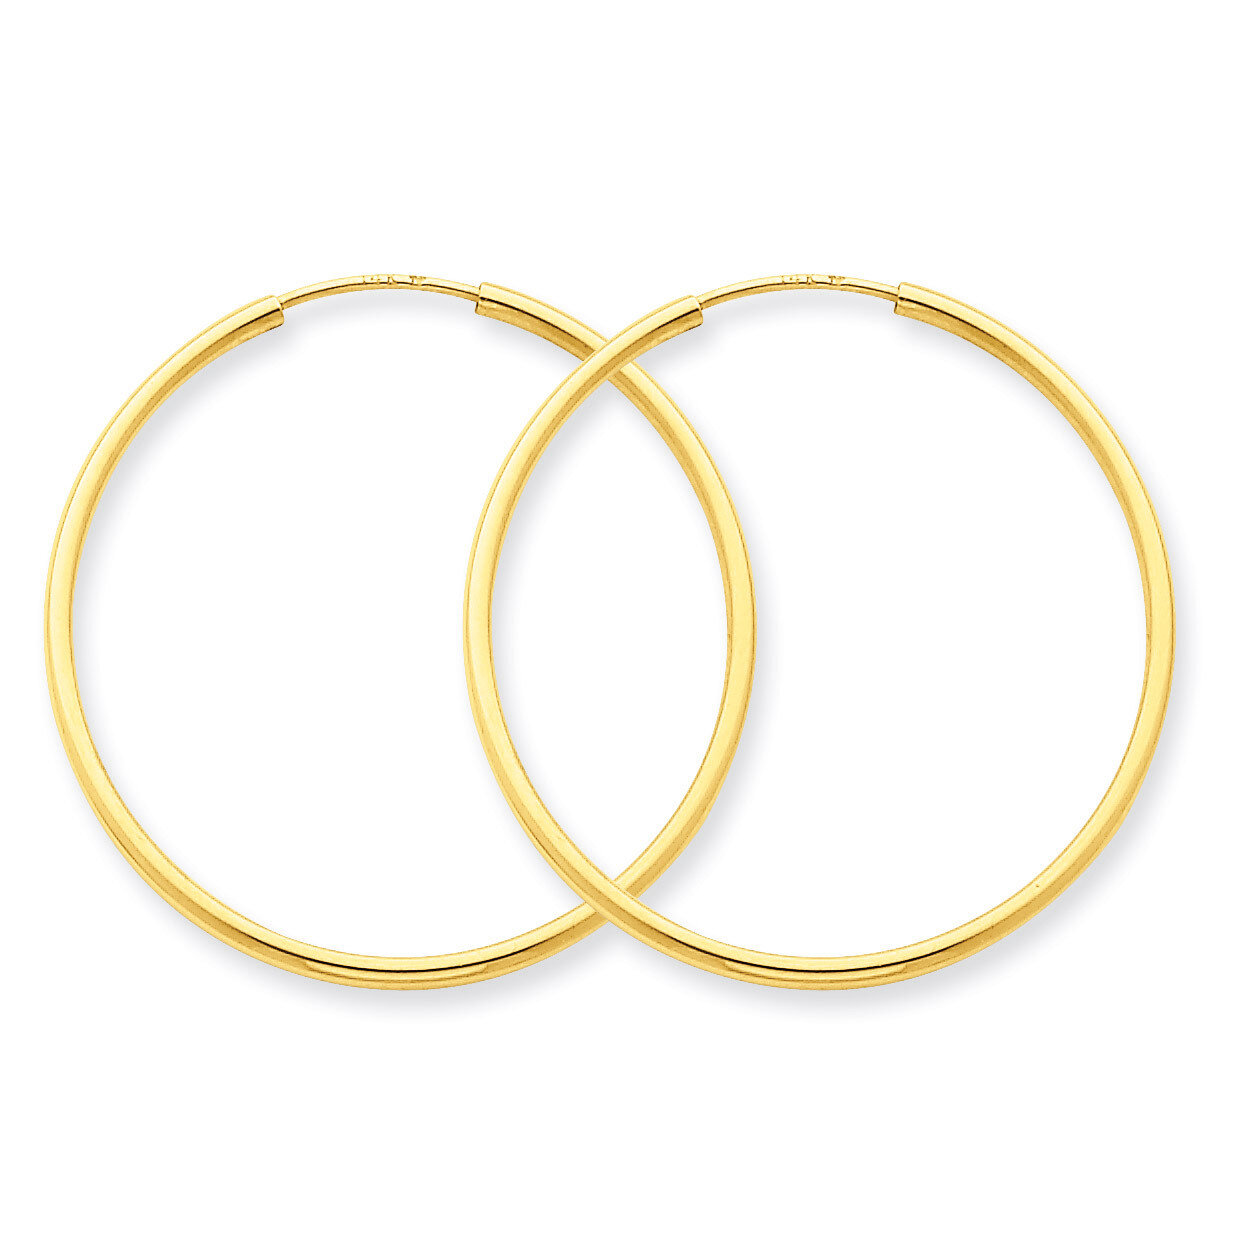 1.5mm Polished Round Endless Hoop Earrings 14k Gold XY1162